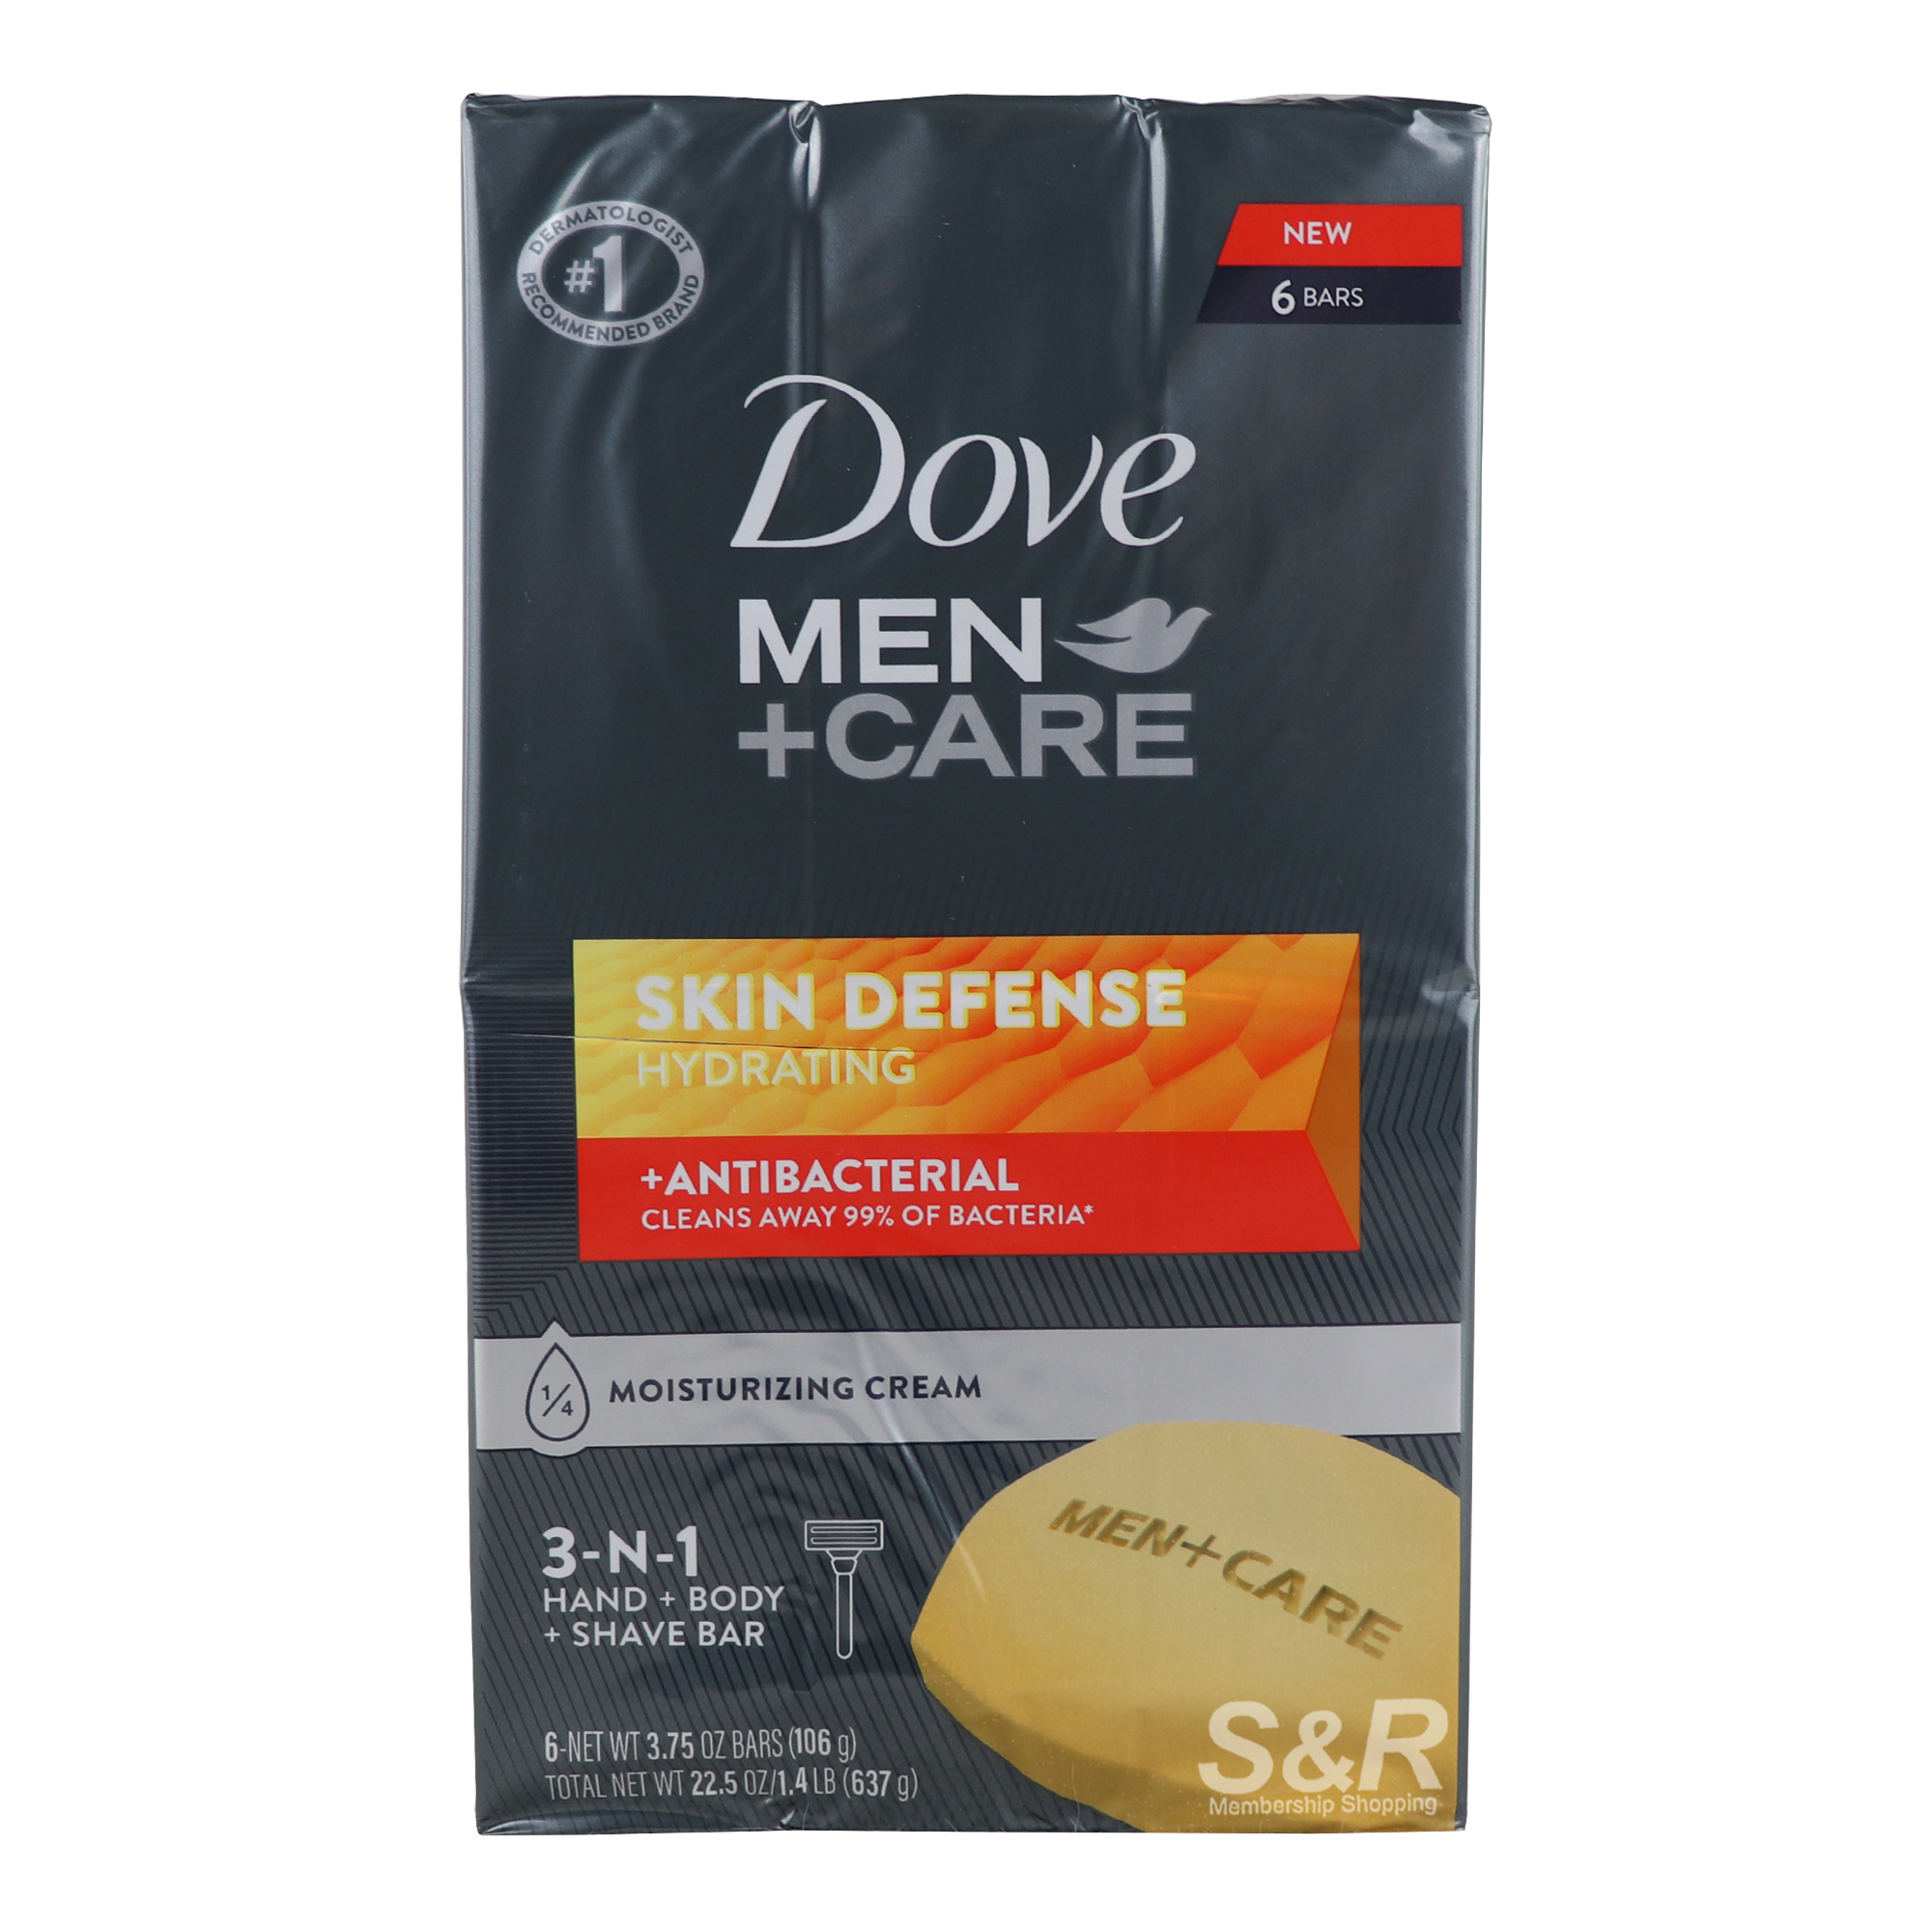 Dove Men+Care Skin Defense 3-in-1 Body and Hand Bar Soap (106g x 6pcs)